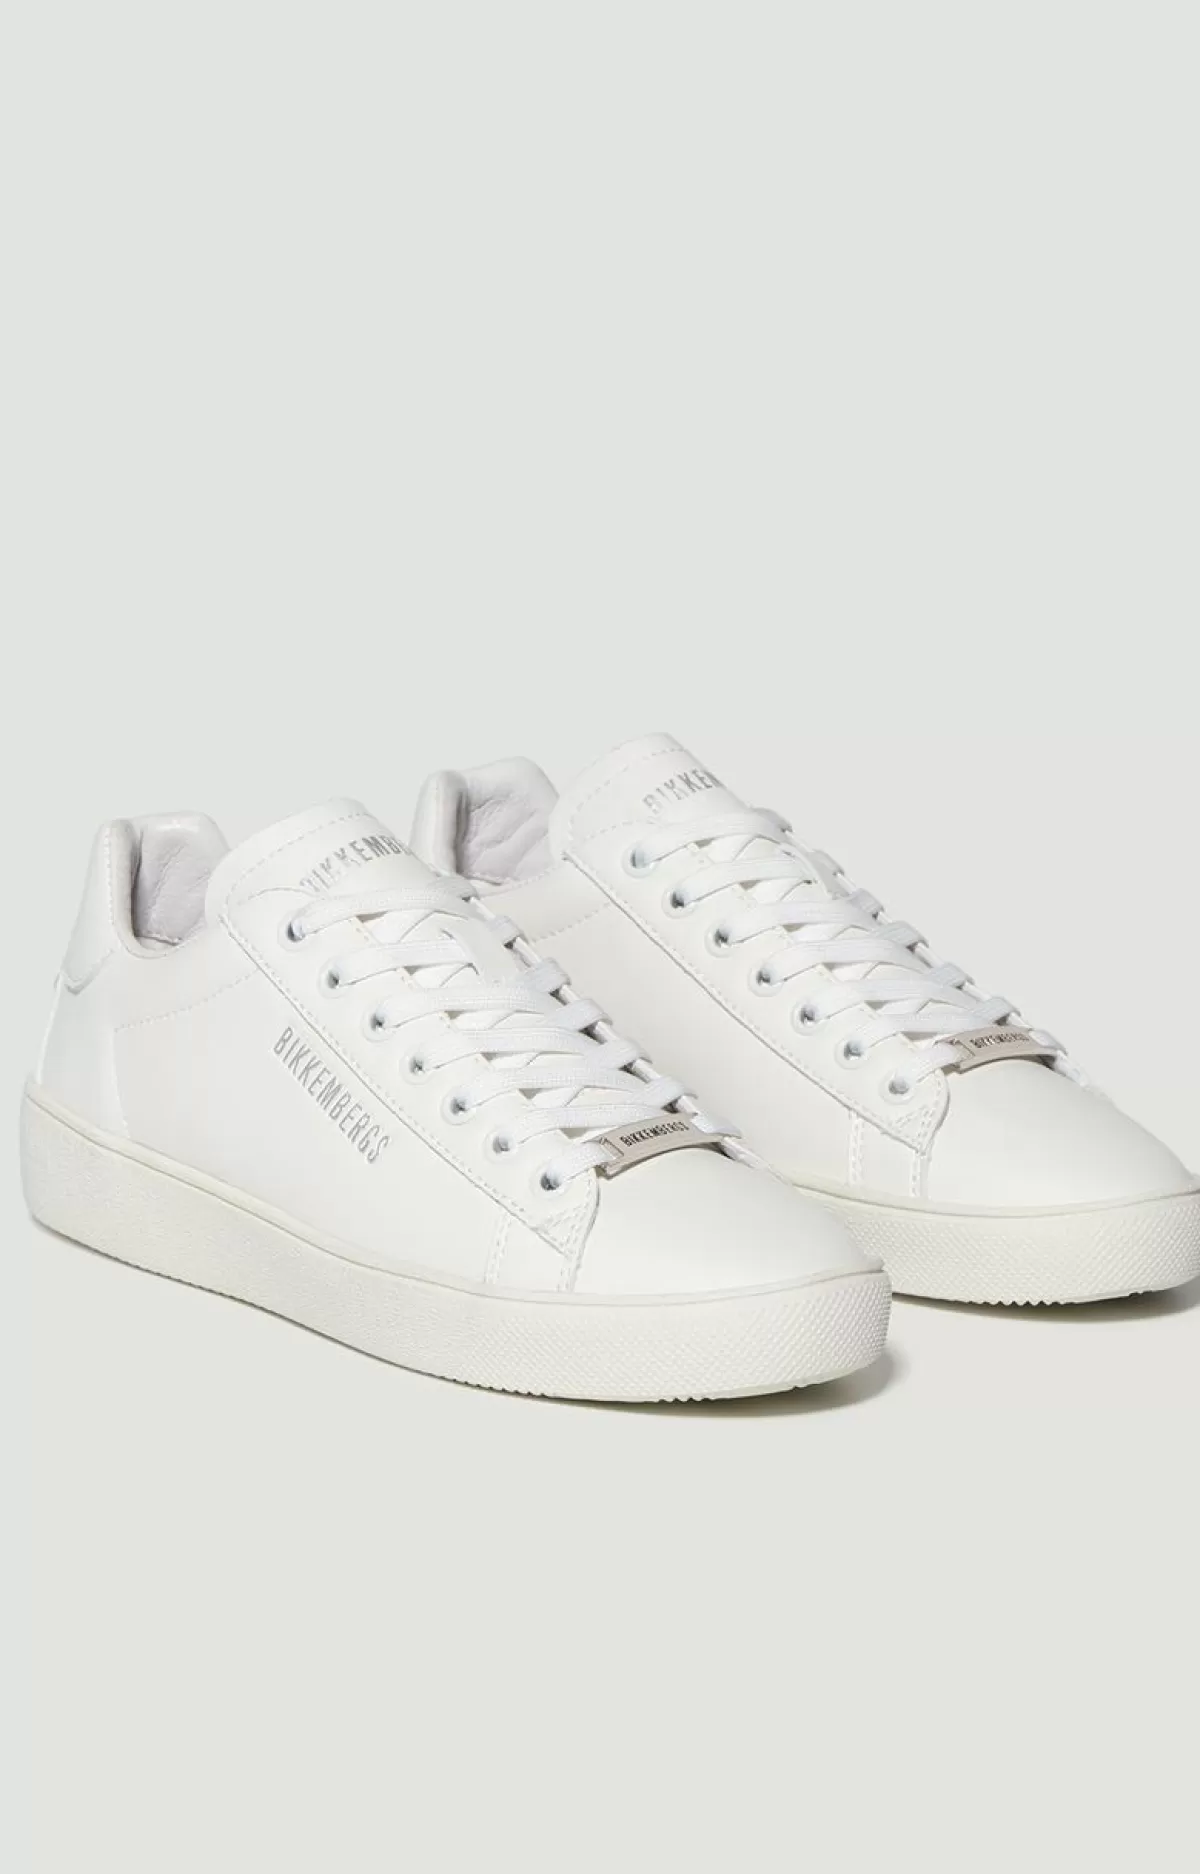 Bikkembergs Women'S Sneakers - Recoba W White Outlet